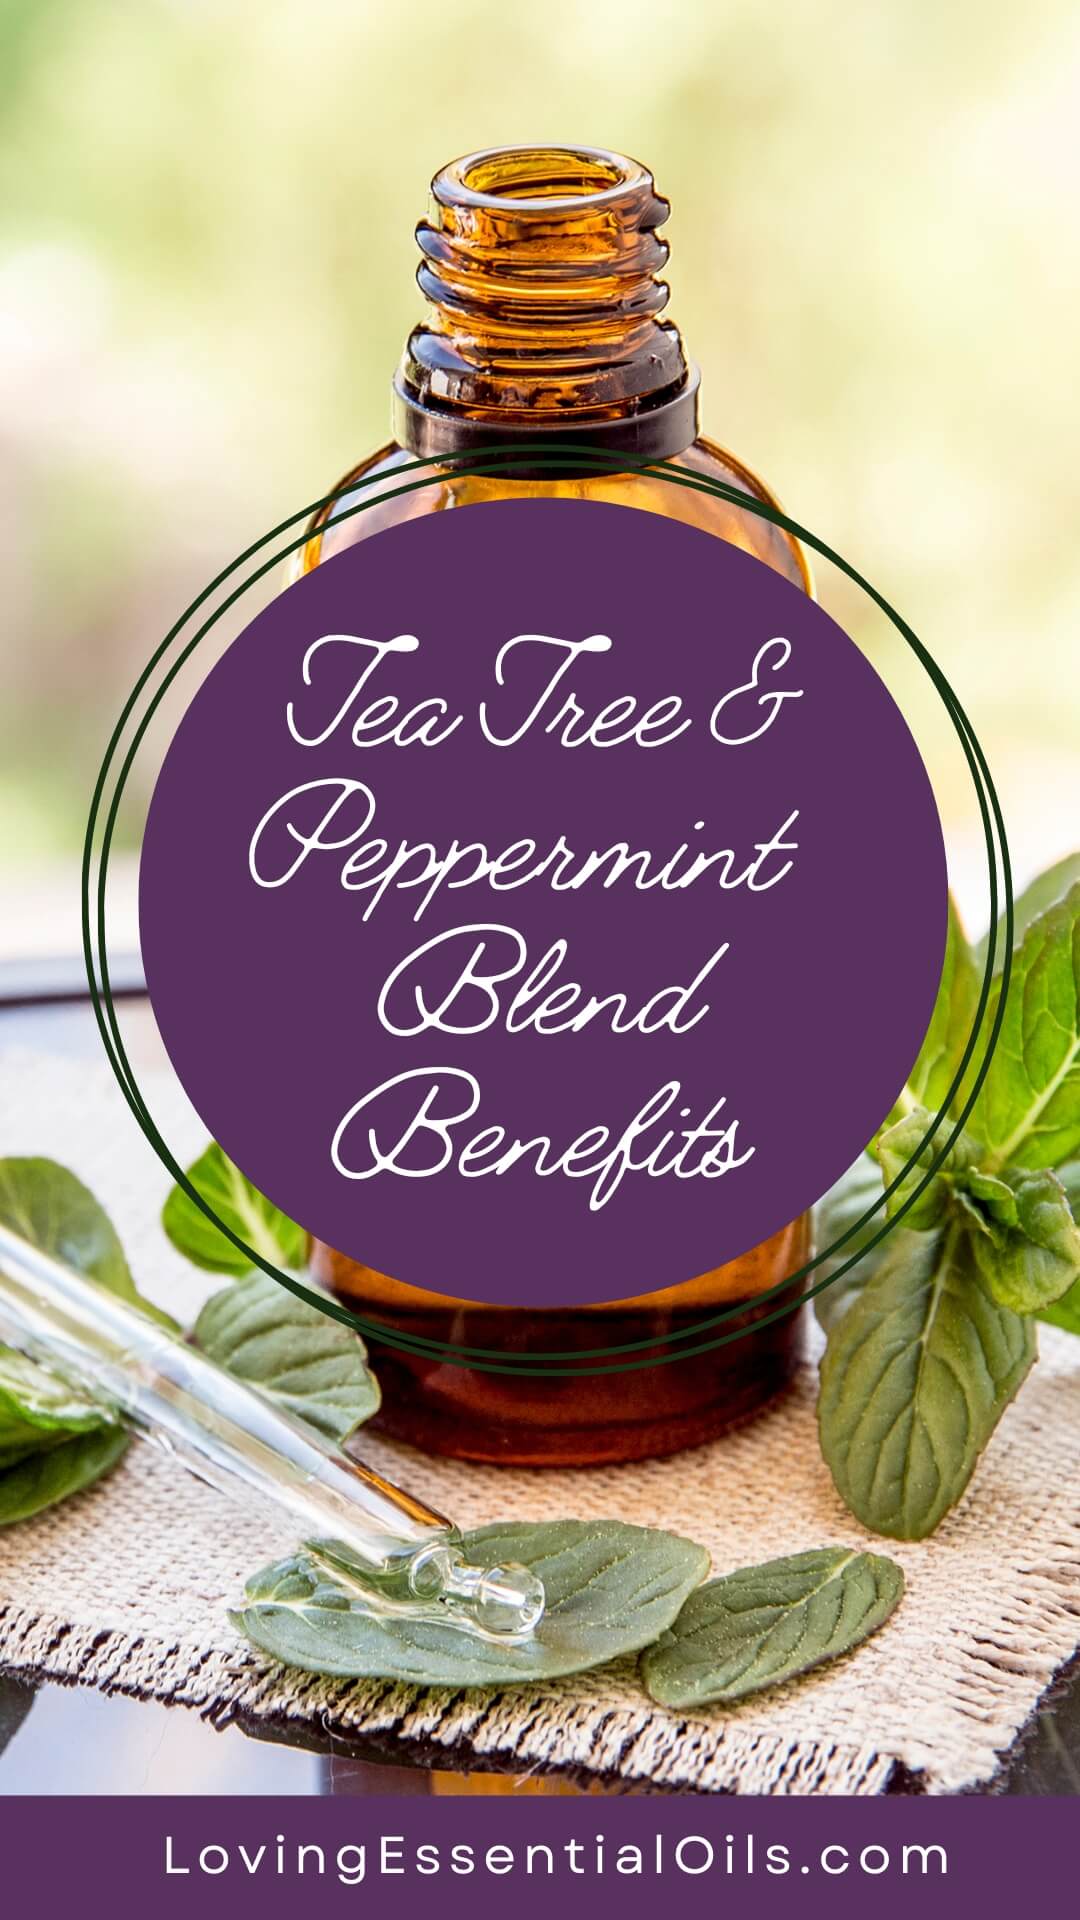 Tea Tree and Peppermint Oil Blend Benefits